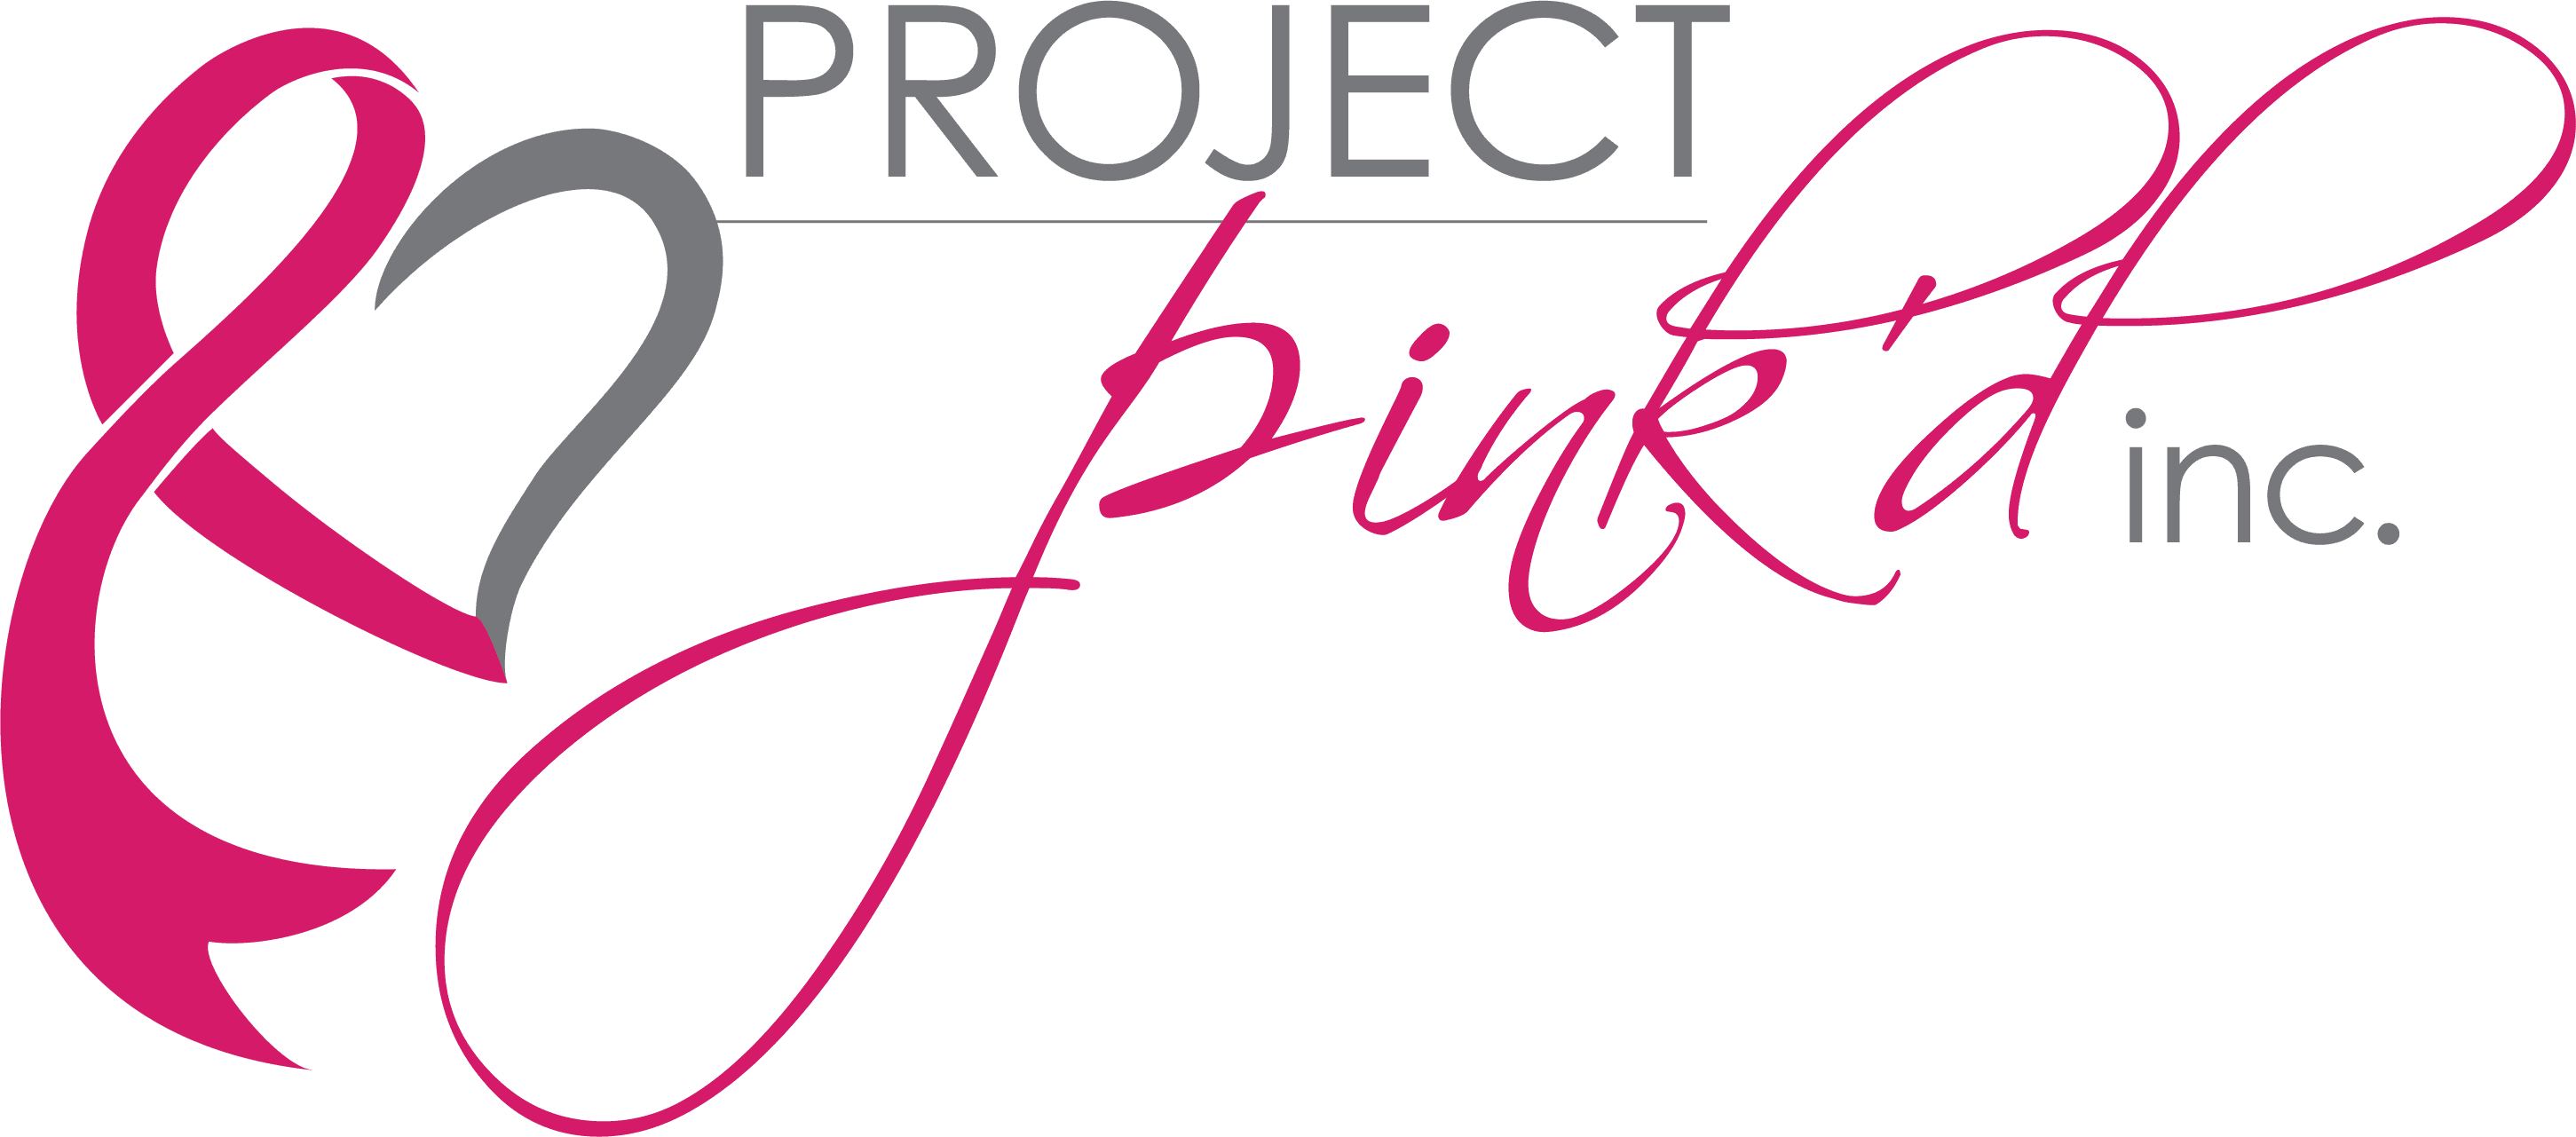 Project Pink’d to host free event and Thanksgiving meal